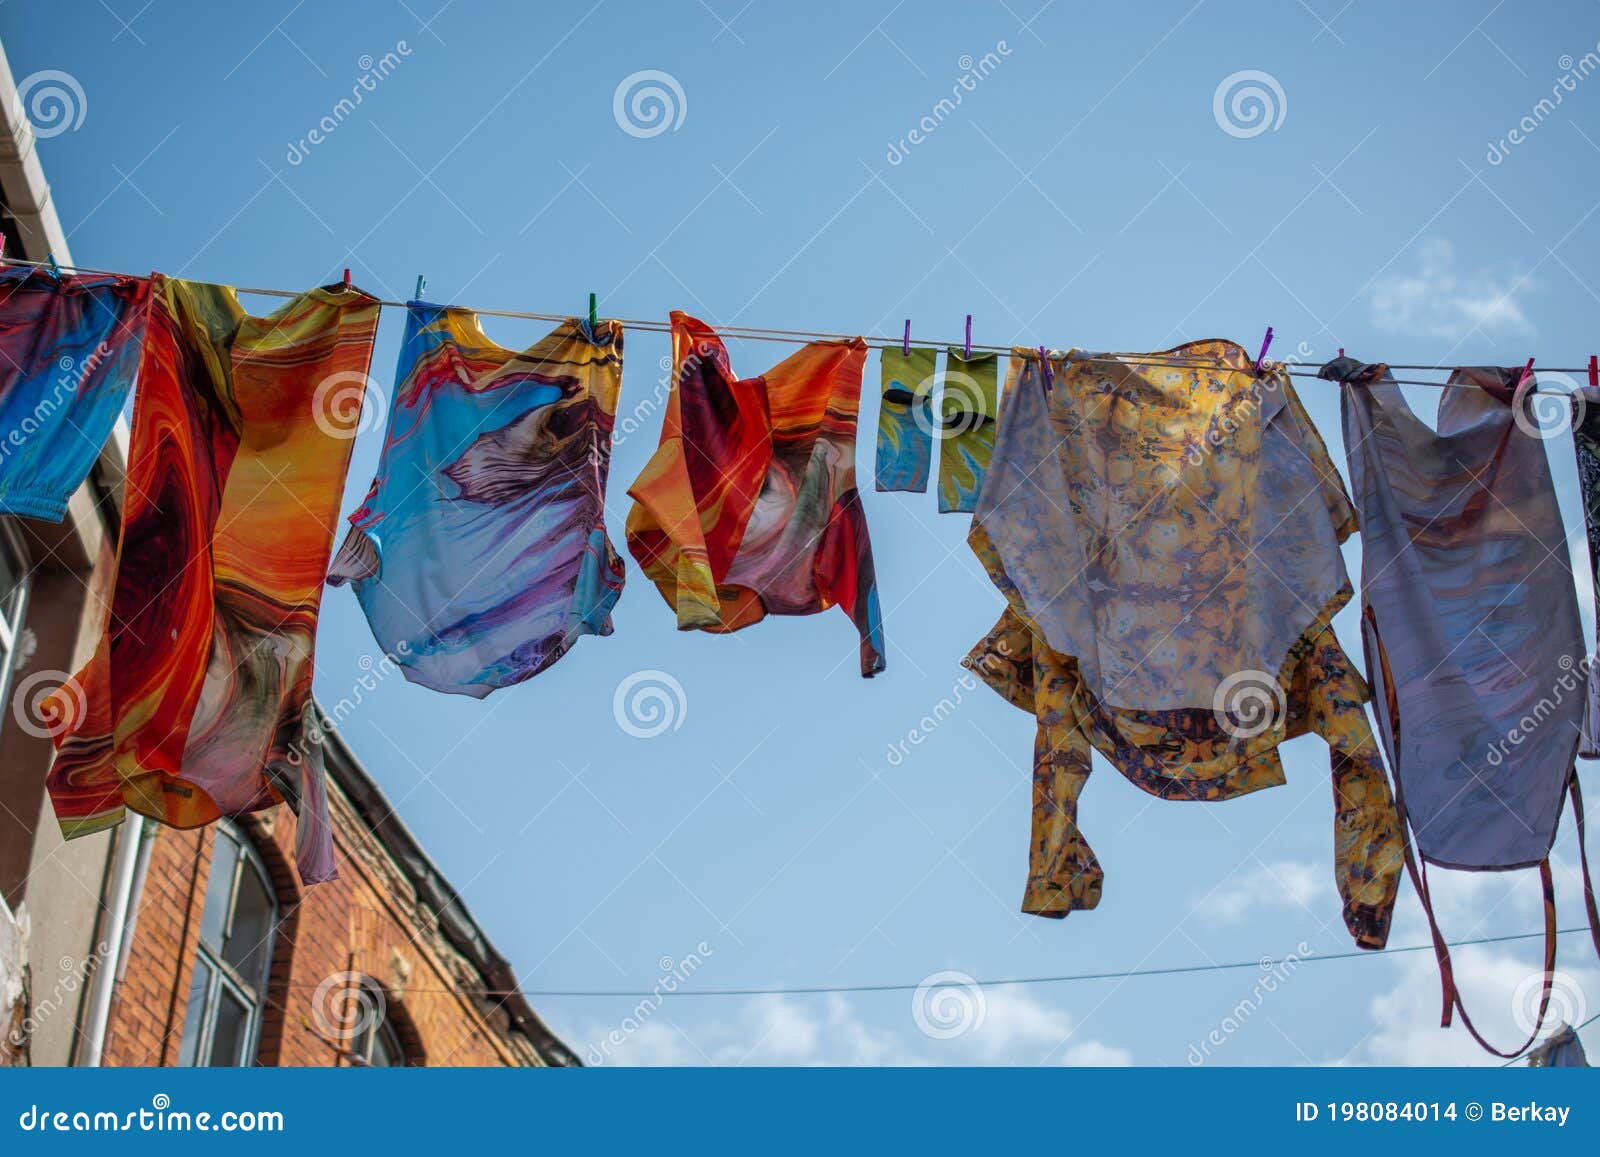 Clothes Hanging from a Clothes Line Rope in a Street Stock Photo